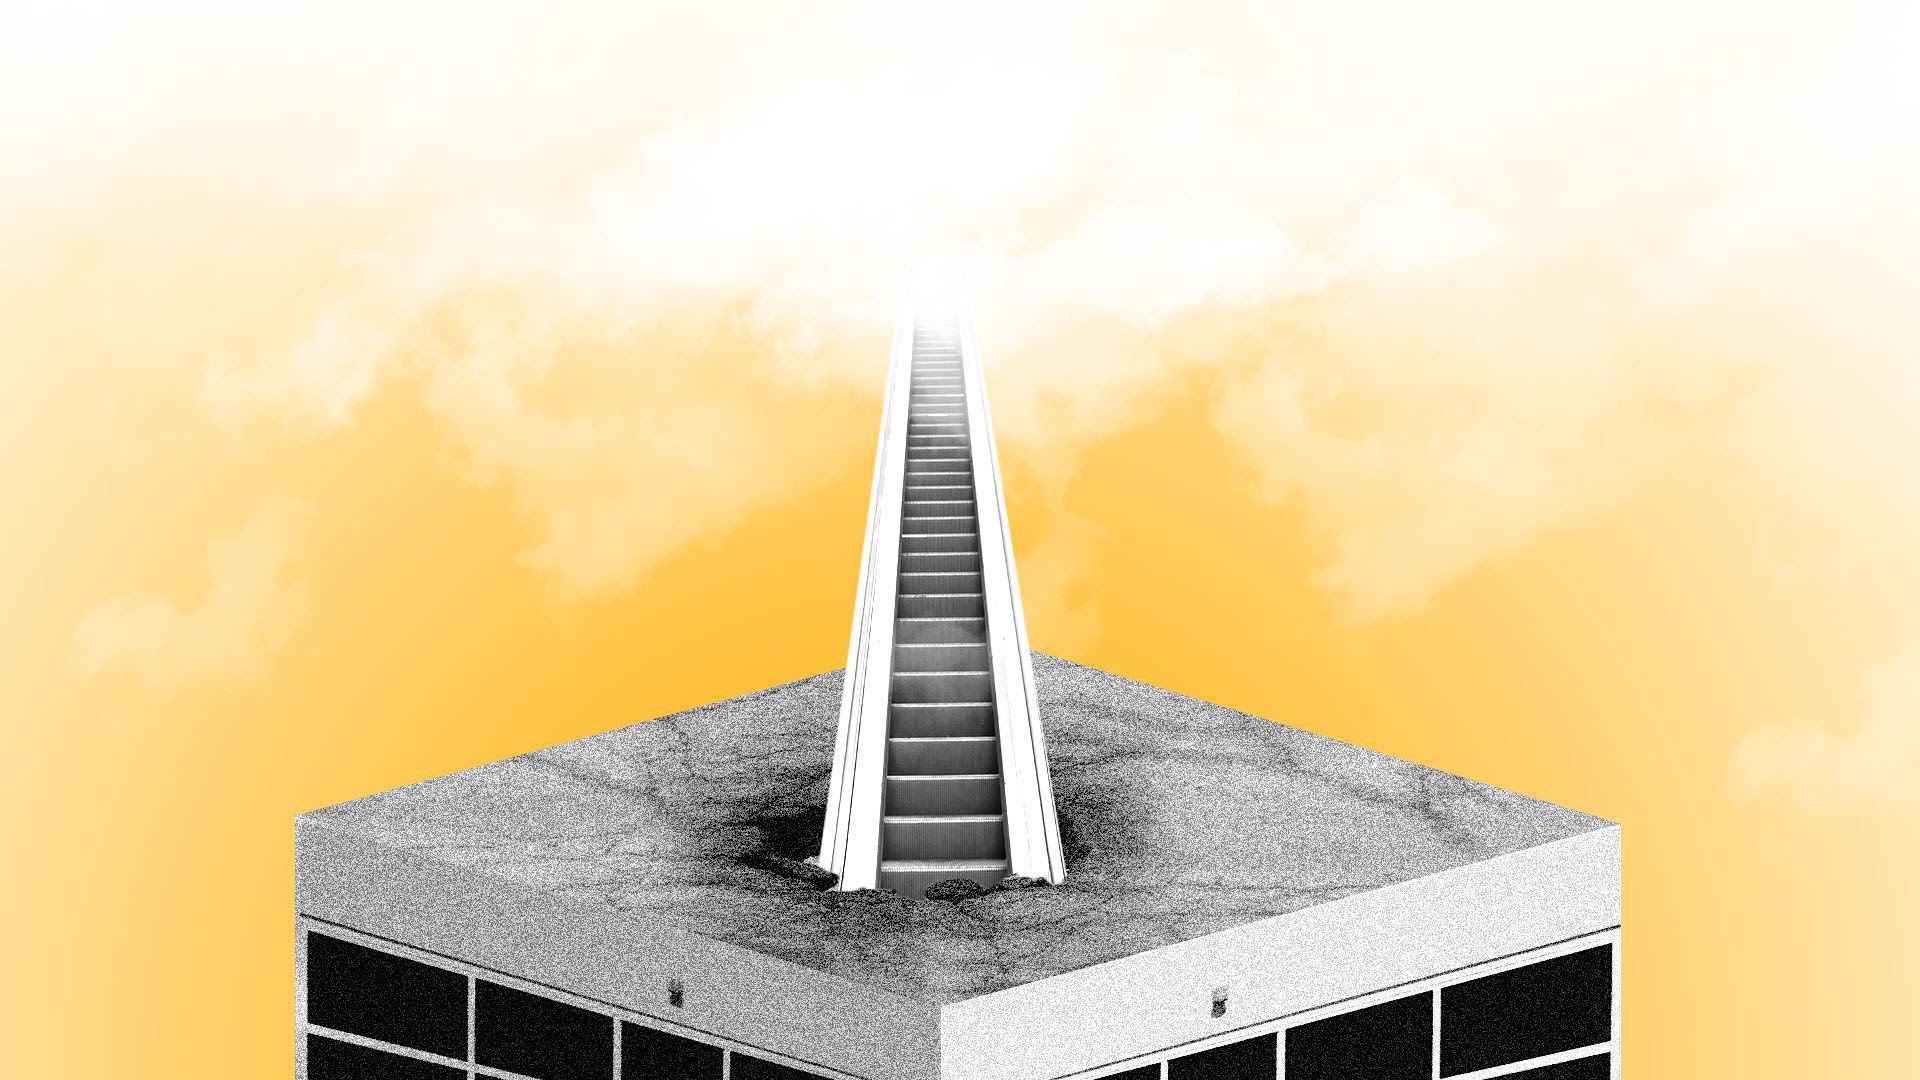 An illustration of a stairway going up.